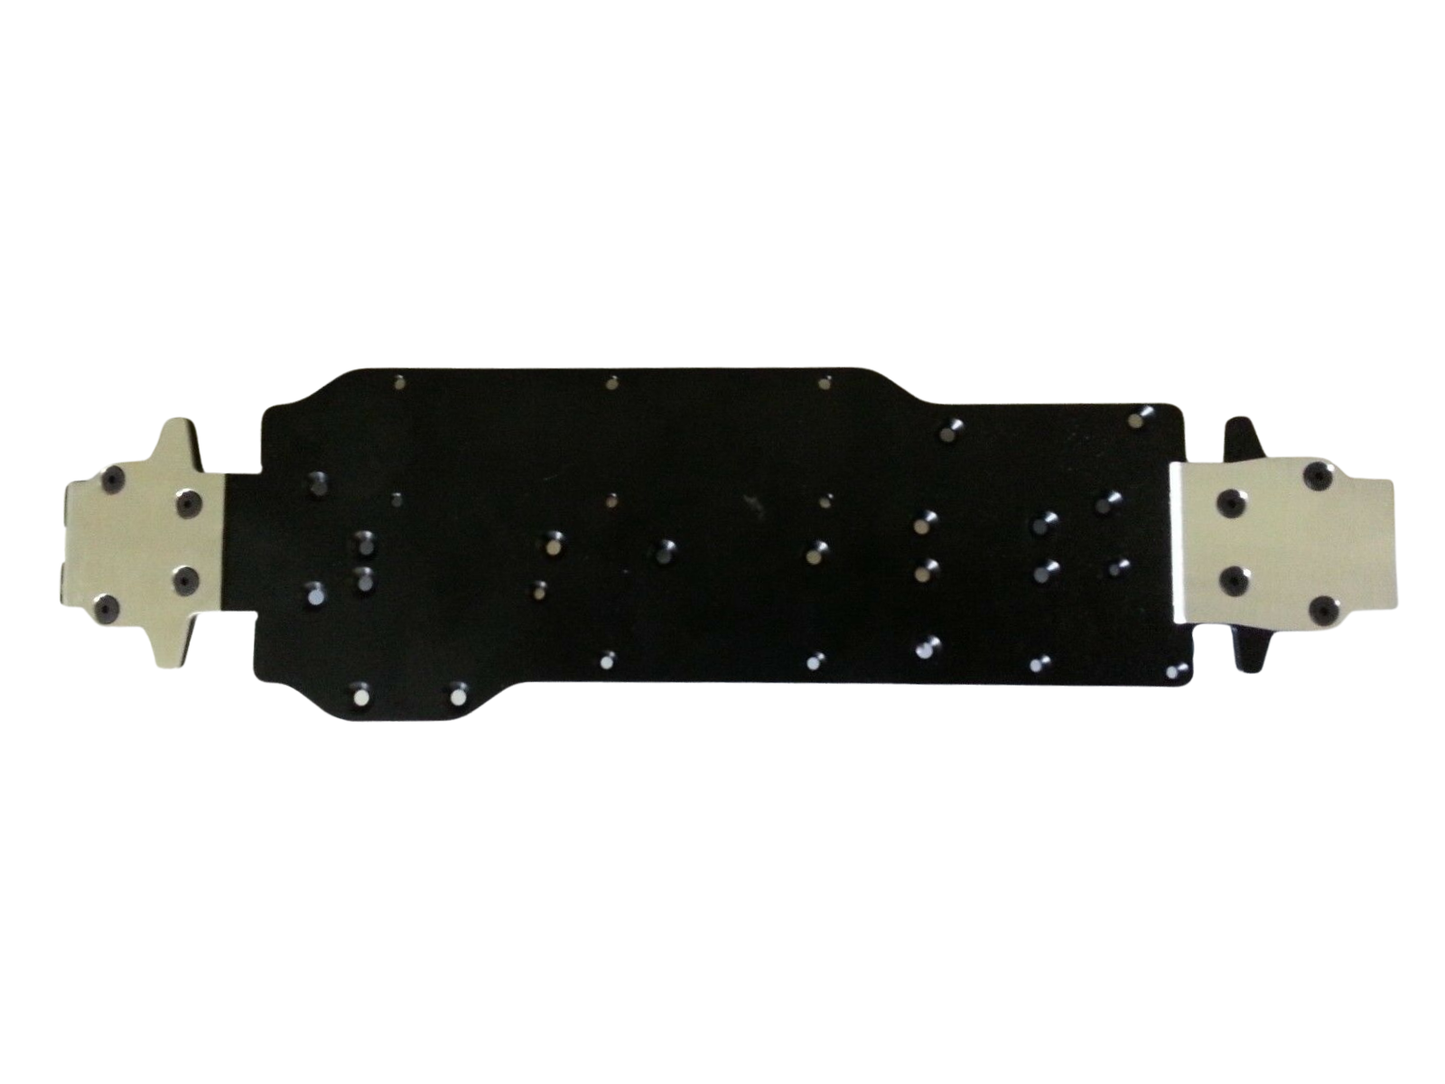 Sumo Racing Skid Plates for Tekno EB/NB48, ET/NT48, & SCT410 1.0, 2.0, 3.0 Models